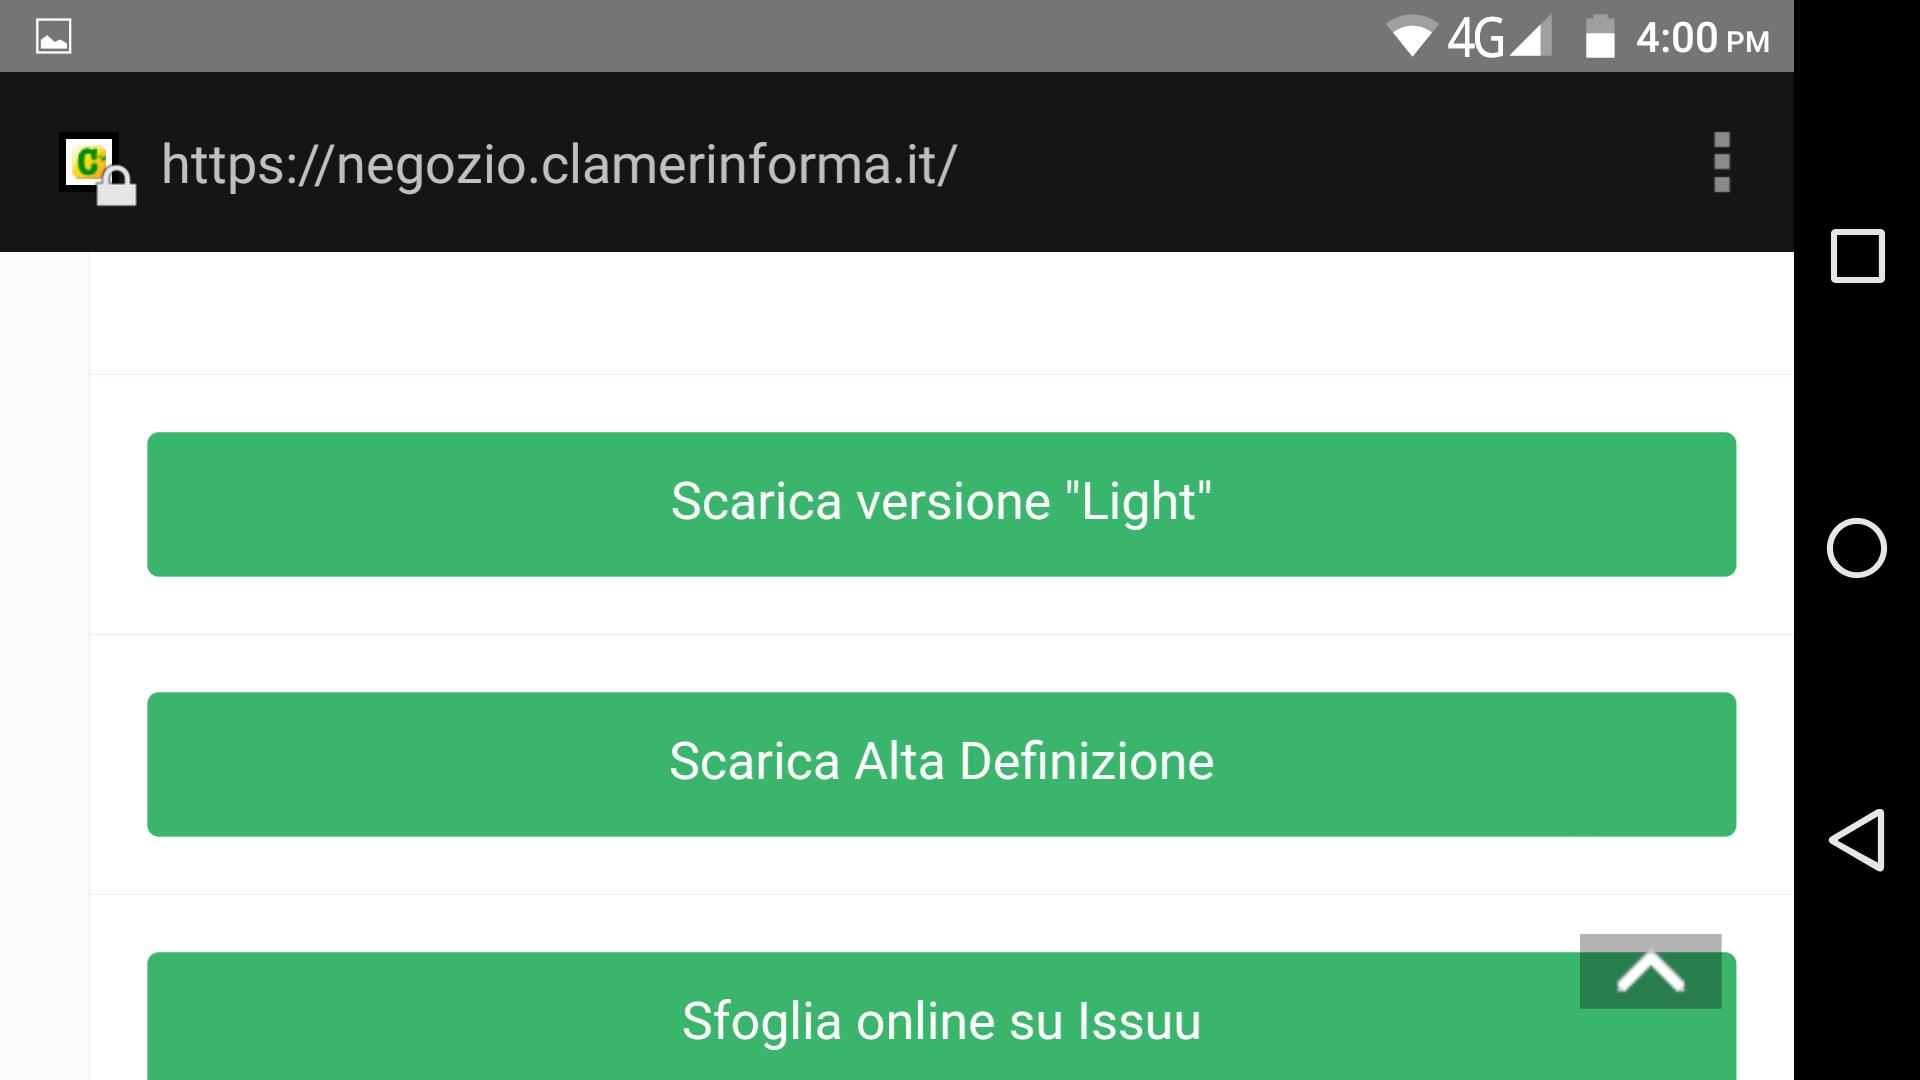 Clamer Informa For Android Apk Download - roblox clamer